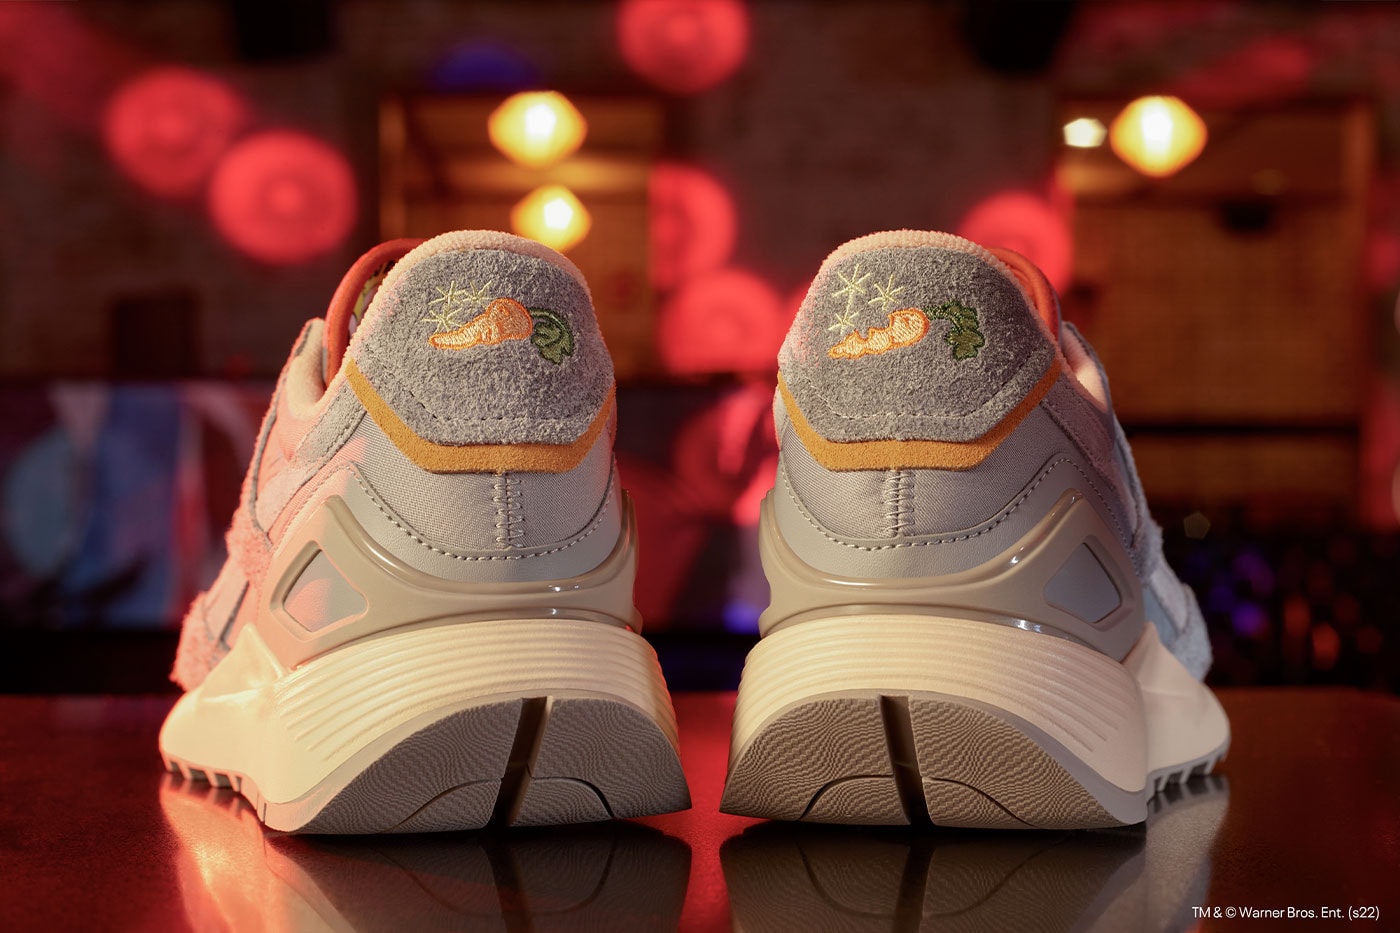 Reebok and Warner Bros. Tap Into 90s Nostalgia for an Playful Looney Tunes Collection shoes sneakers footwear bugs bunny coyote lunar new year chinese new year cny year of the tiger